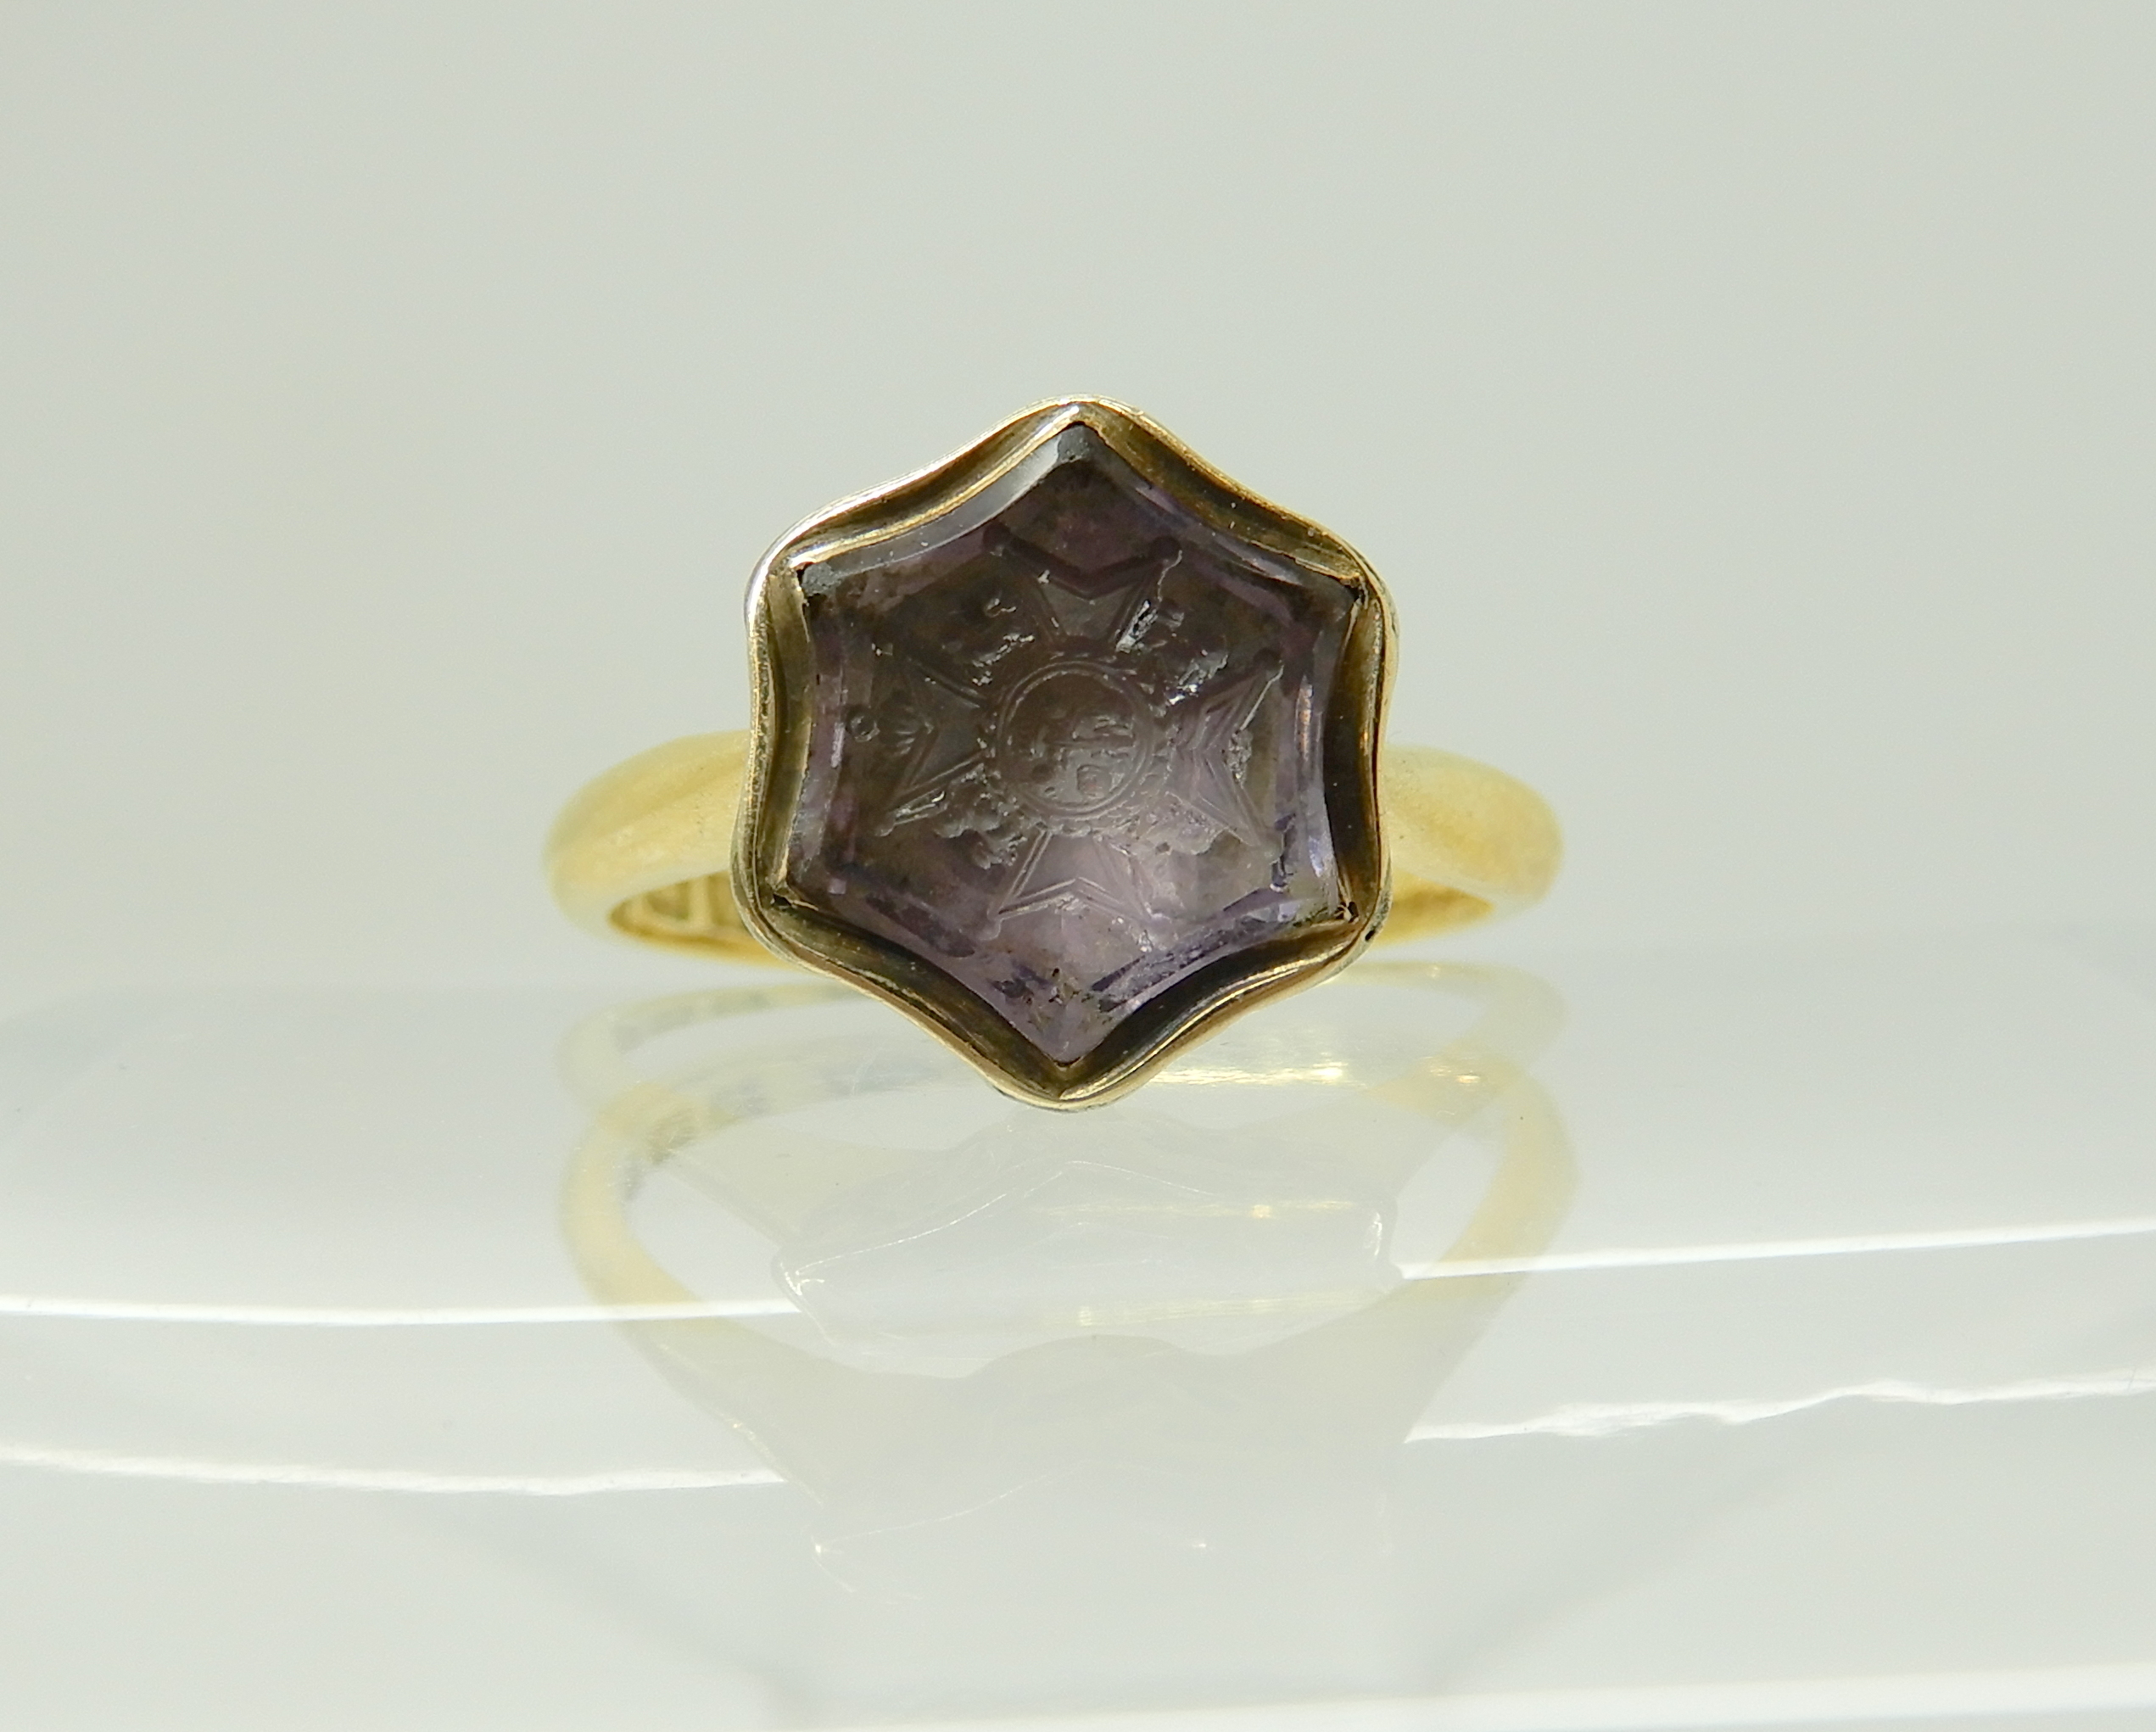 An 18ct gold intaglio engraved amethyst signet ring, carved with a Knights cross, hallmarked